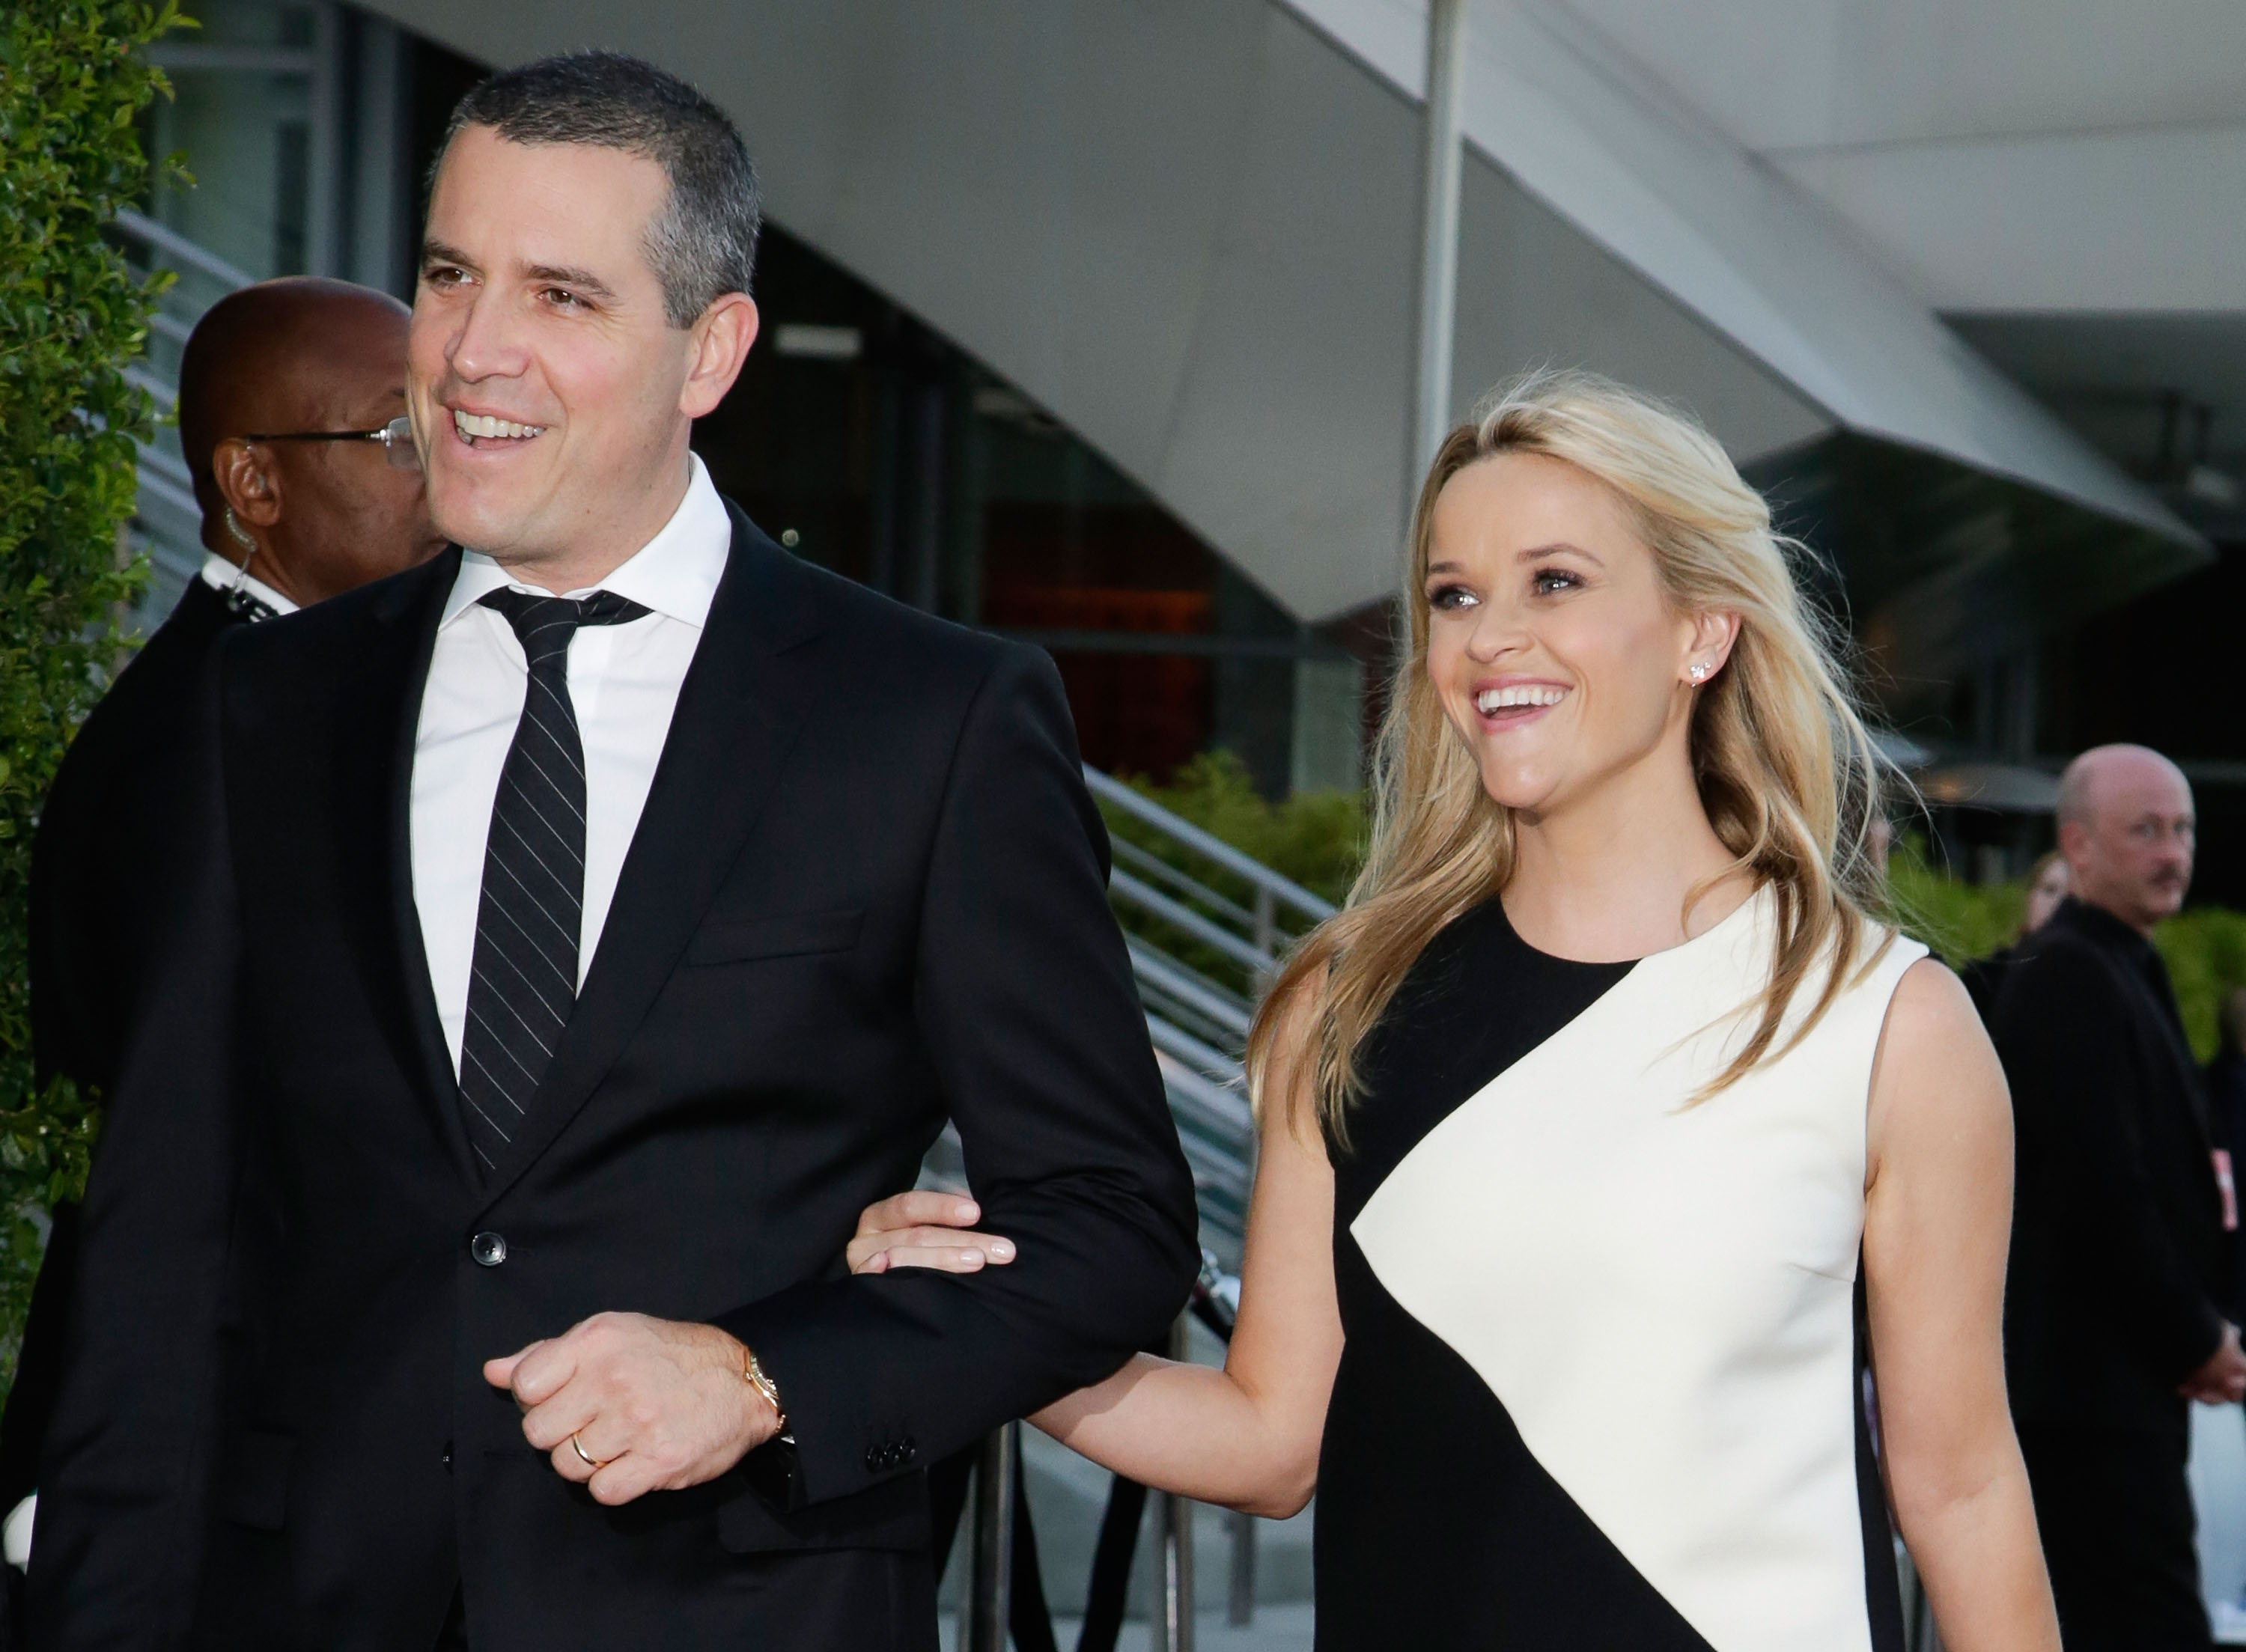 Jim Toth and Reese Witherspoon at The Broad Museum's Inaugural Celebration at The Broad, on September 18, 2015, in Los Angeles, California | Source: Getty Image